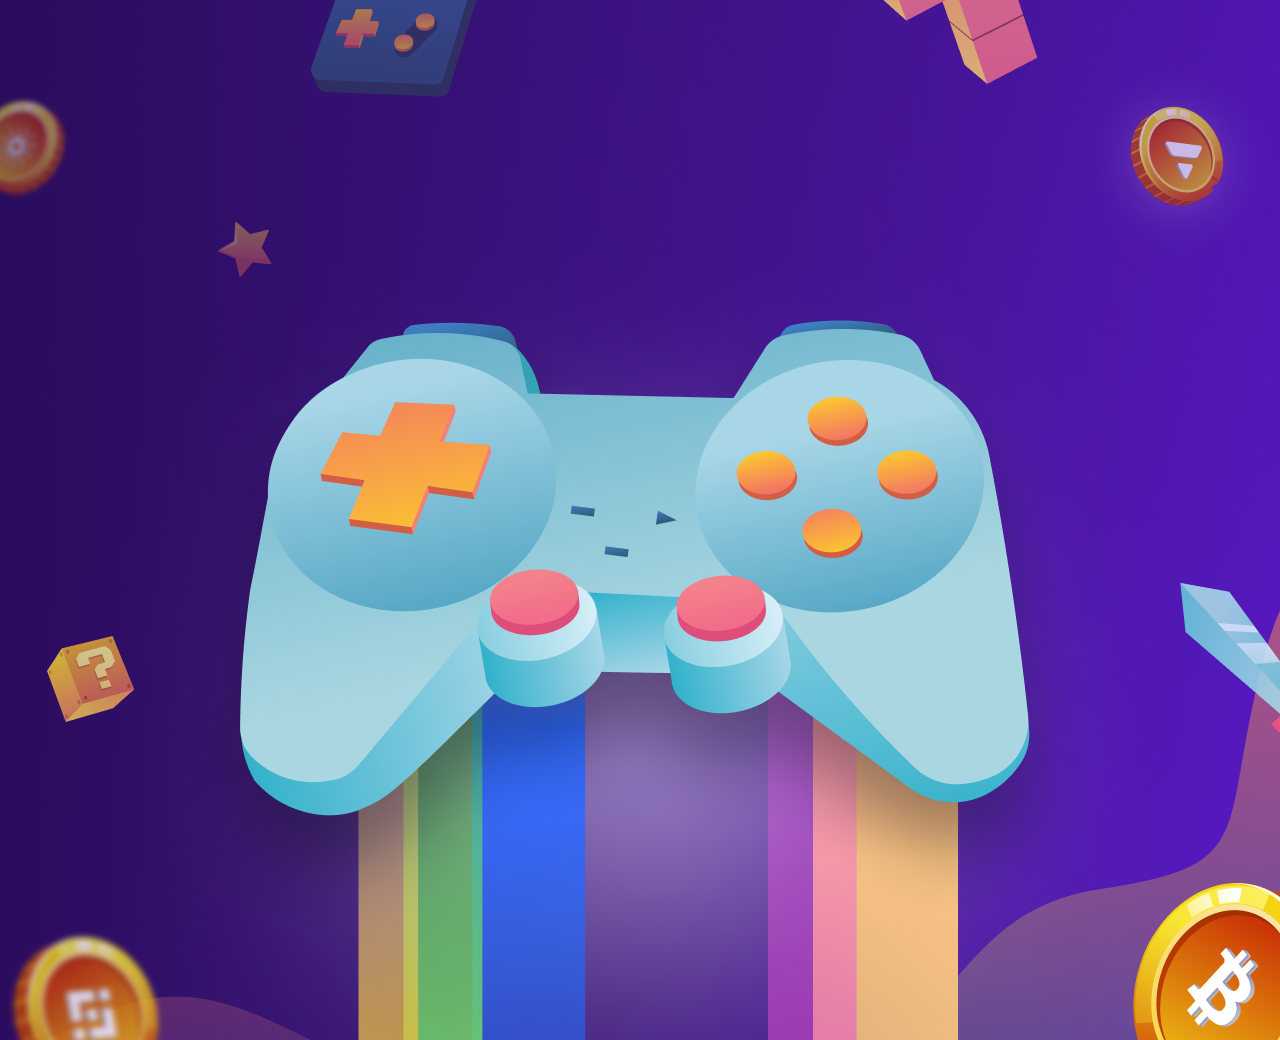 Top play-to-earn crypto games